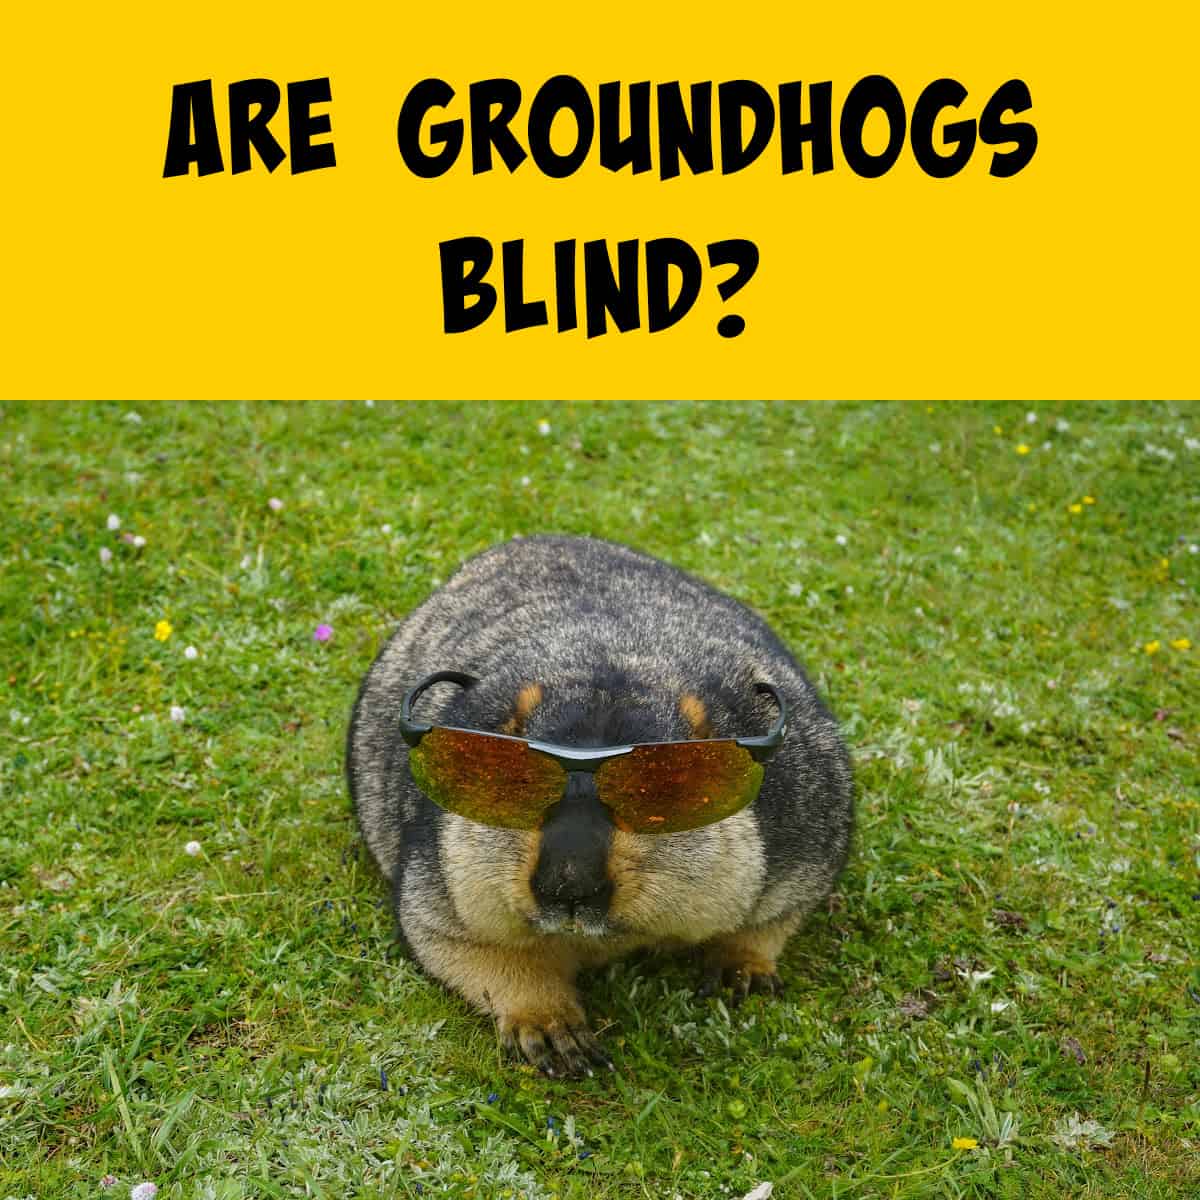 Picture of a groundhog wearing glasses